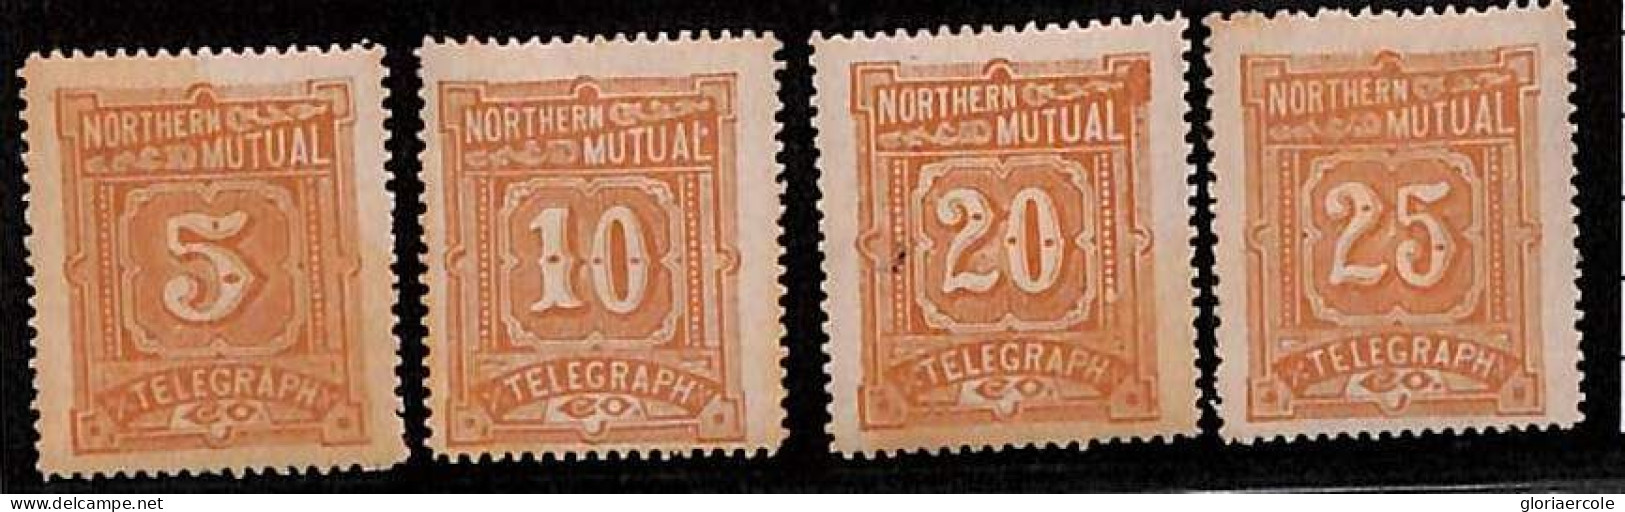 76577 - United States - STAMPS - Scott #  TELEGRAPH  11T 1/4  Mint Hinged M H - Télégraphes